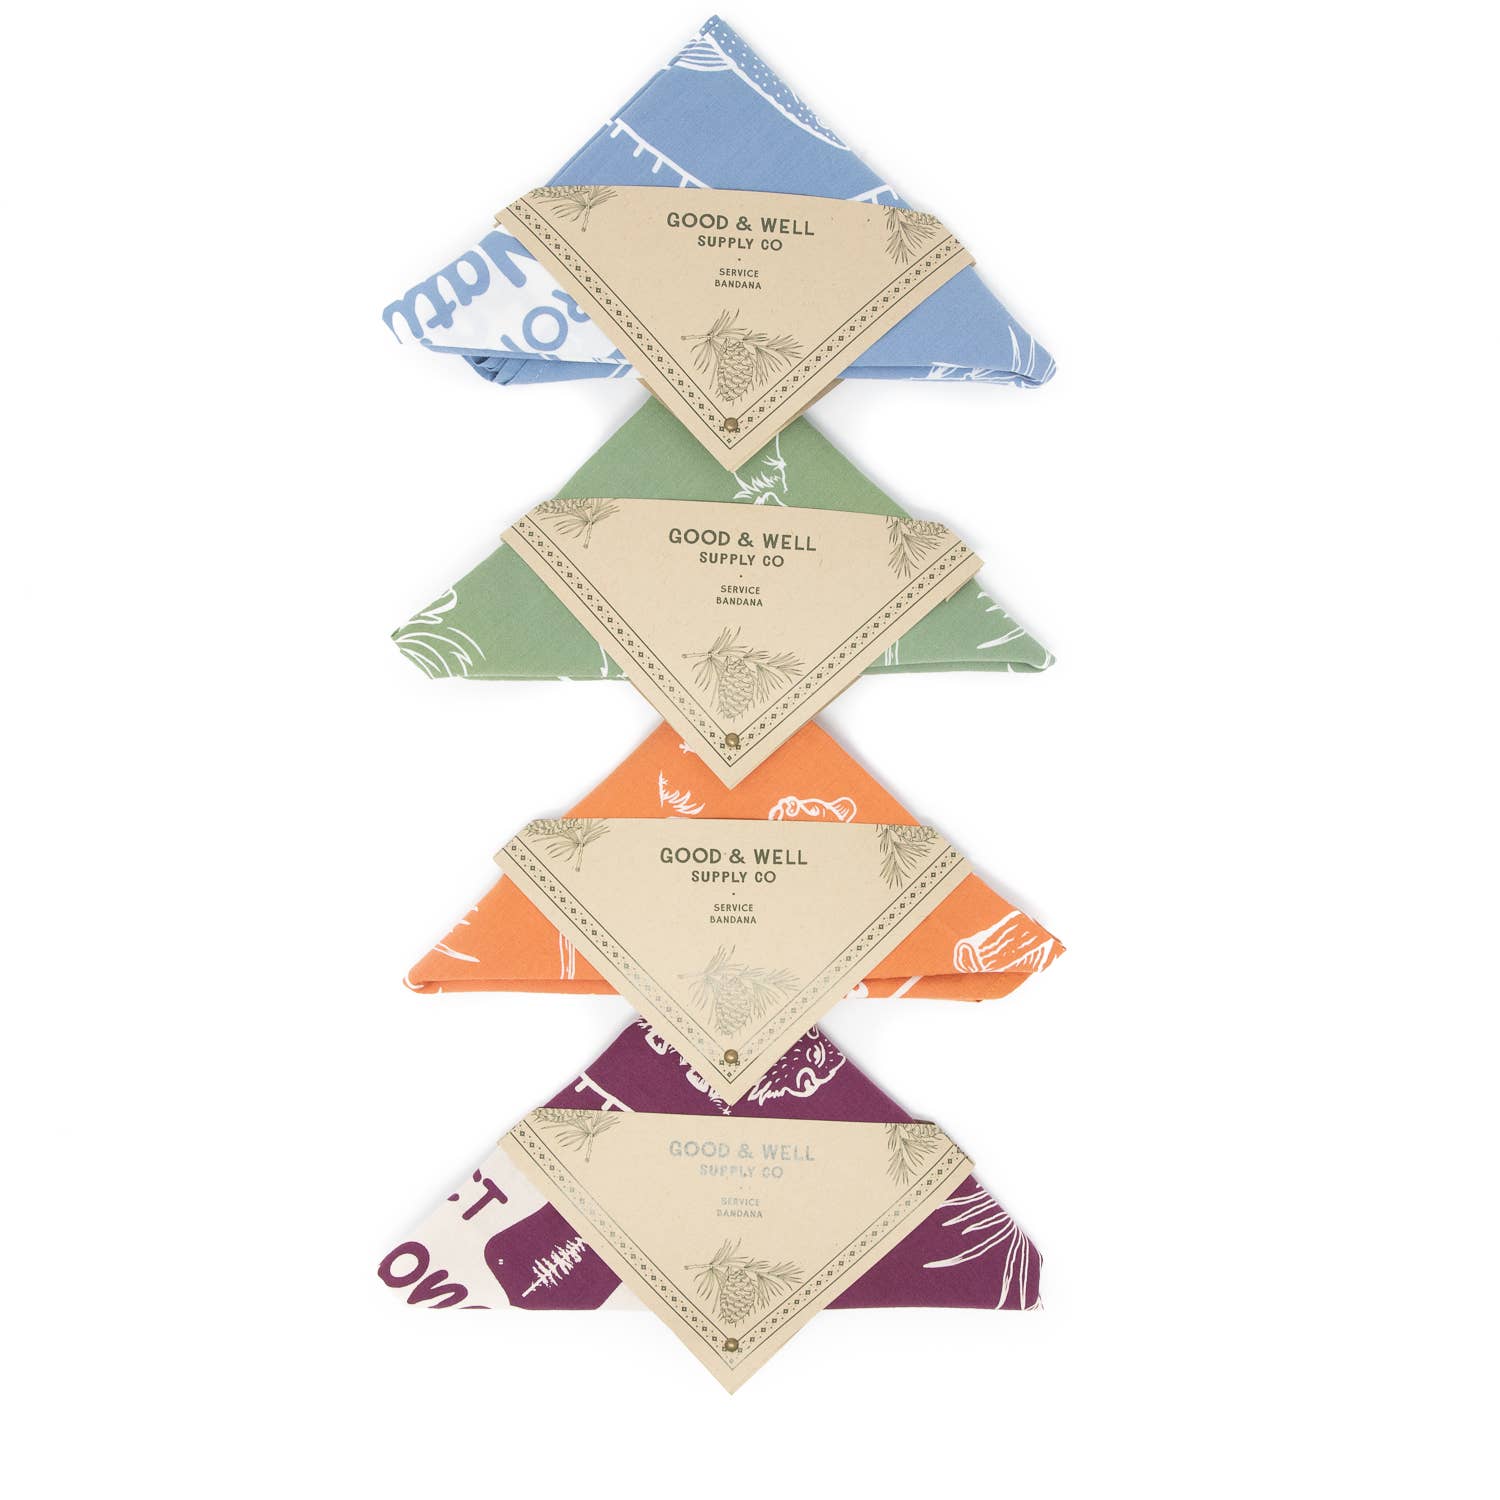 Range of colors of service bandanas by Good + Well Supply Co